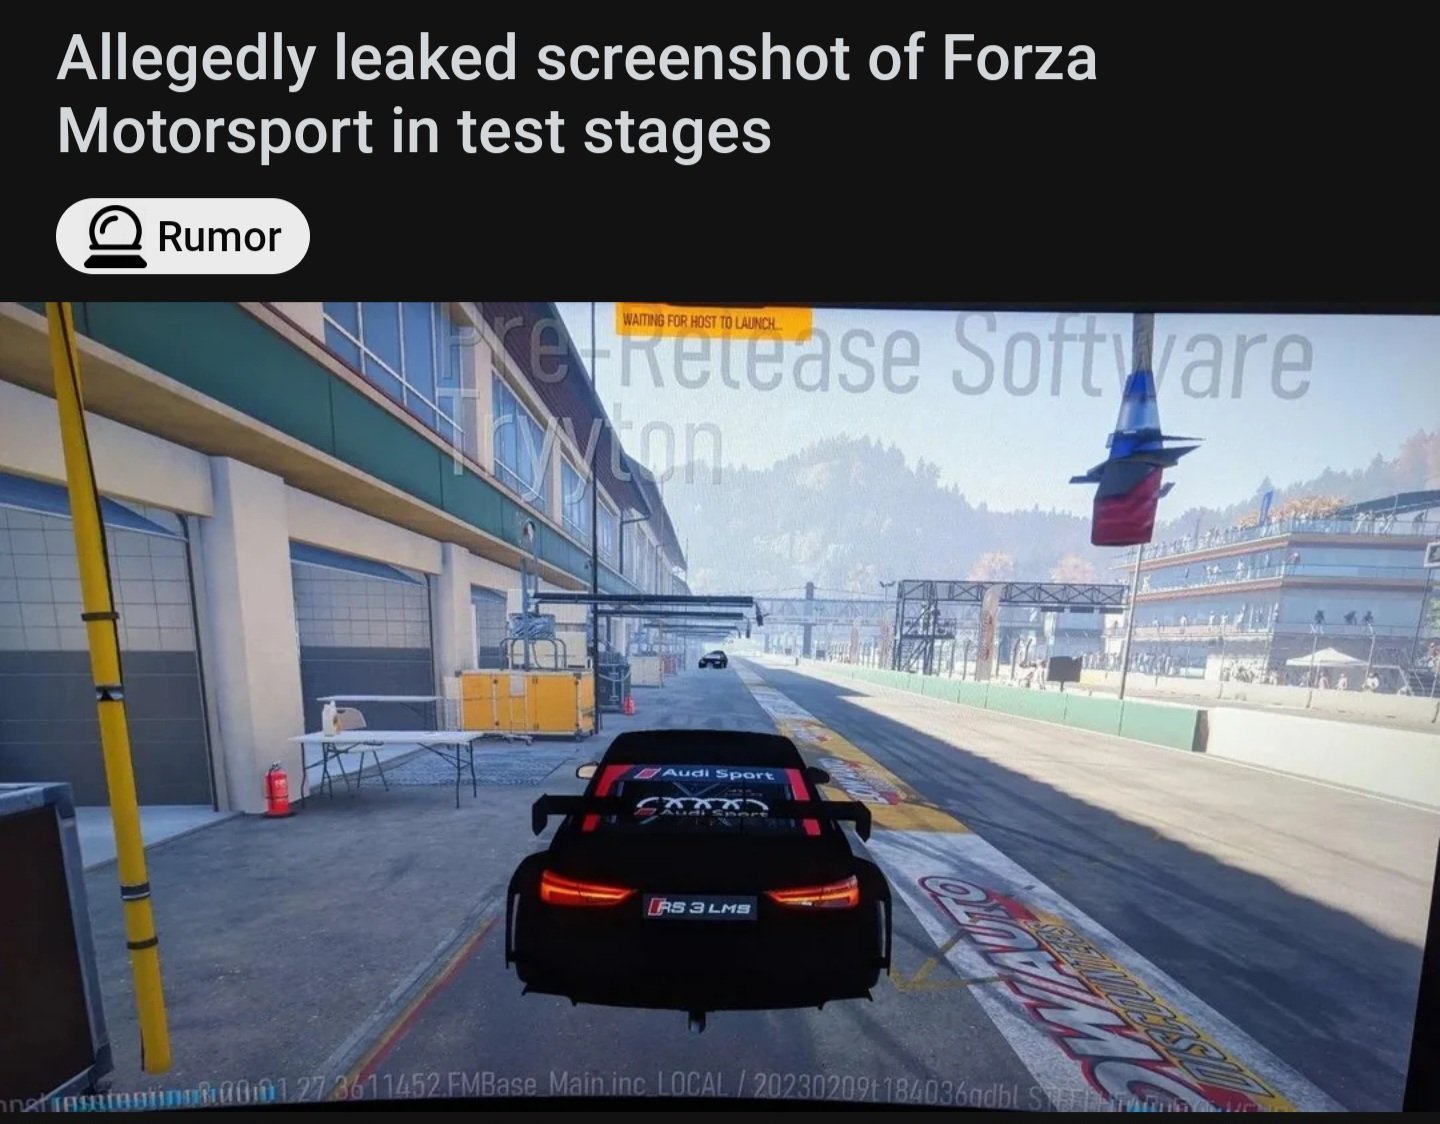 HYPED on X: What are your predictions for Forza Motorsport 8